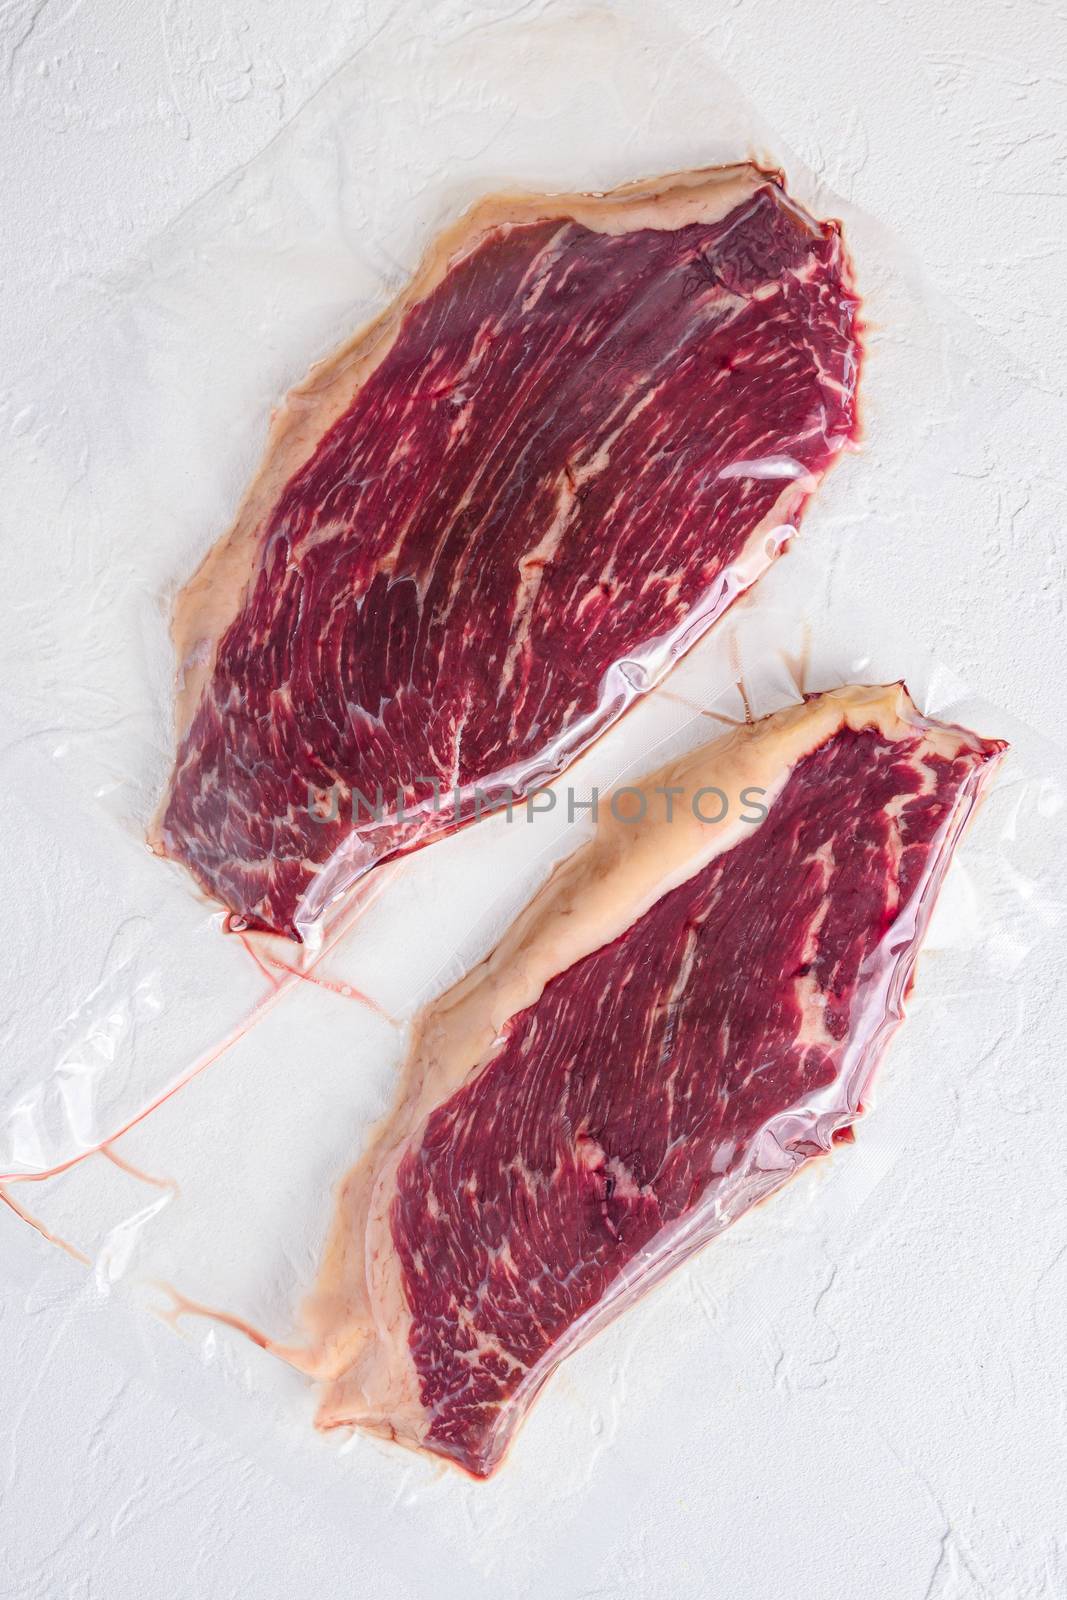 Raw picanha steak vacuum packed organic beef meat on white concrete textured background, top view. by Ilianesolenyi